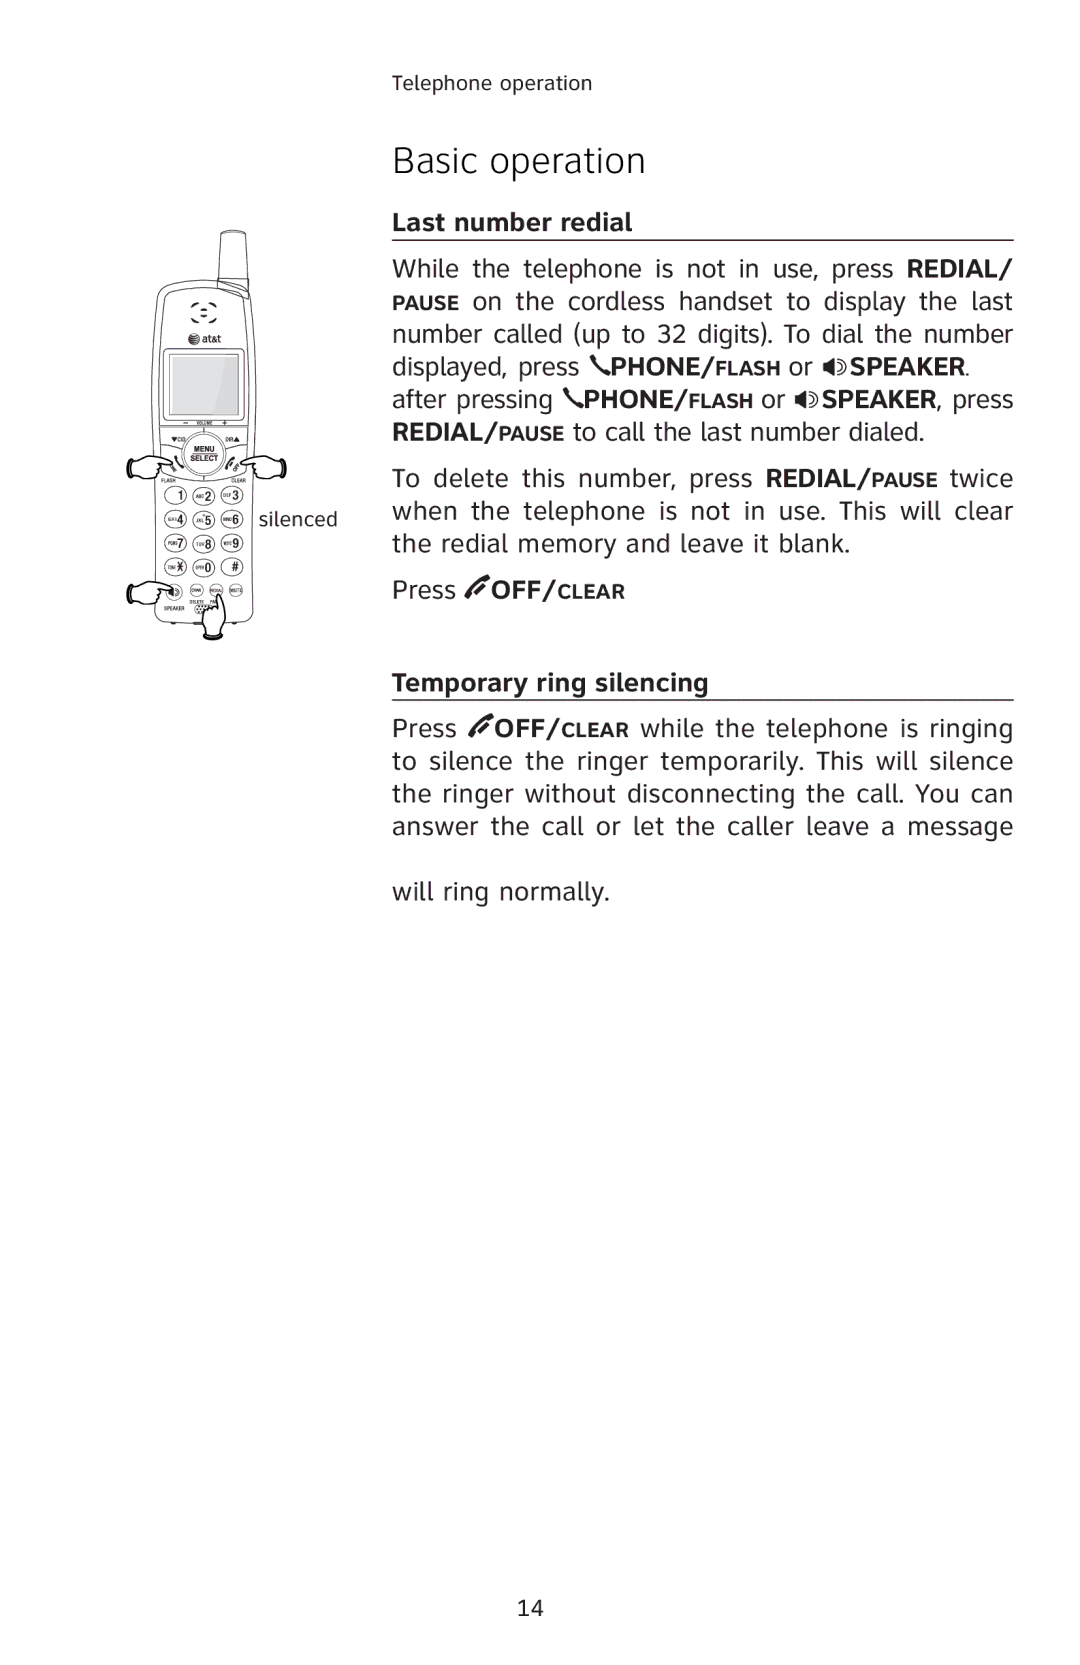 AT&T E5811 user manual Last number redial, Press OFF/CLEAR’ƒ–‡’Ɠ, Temporary ring silencing, ‡Œ…ƒ 